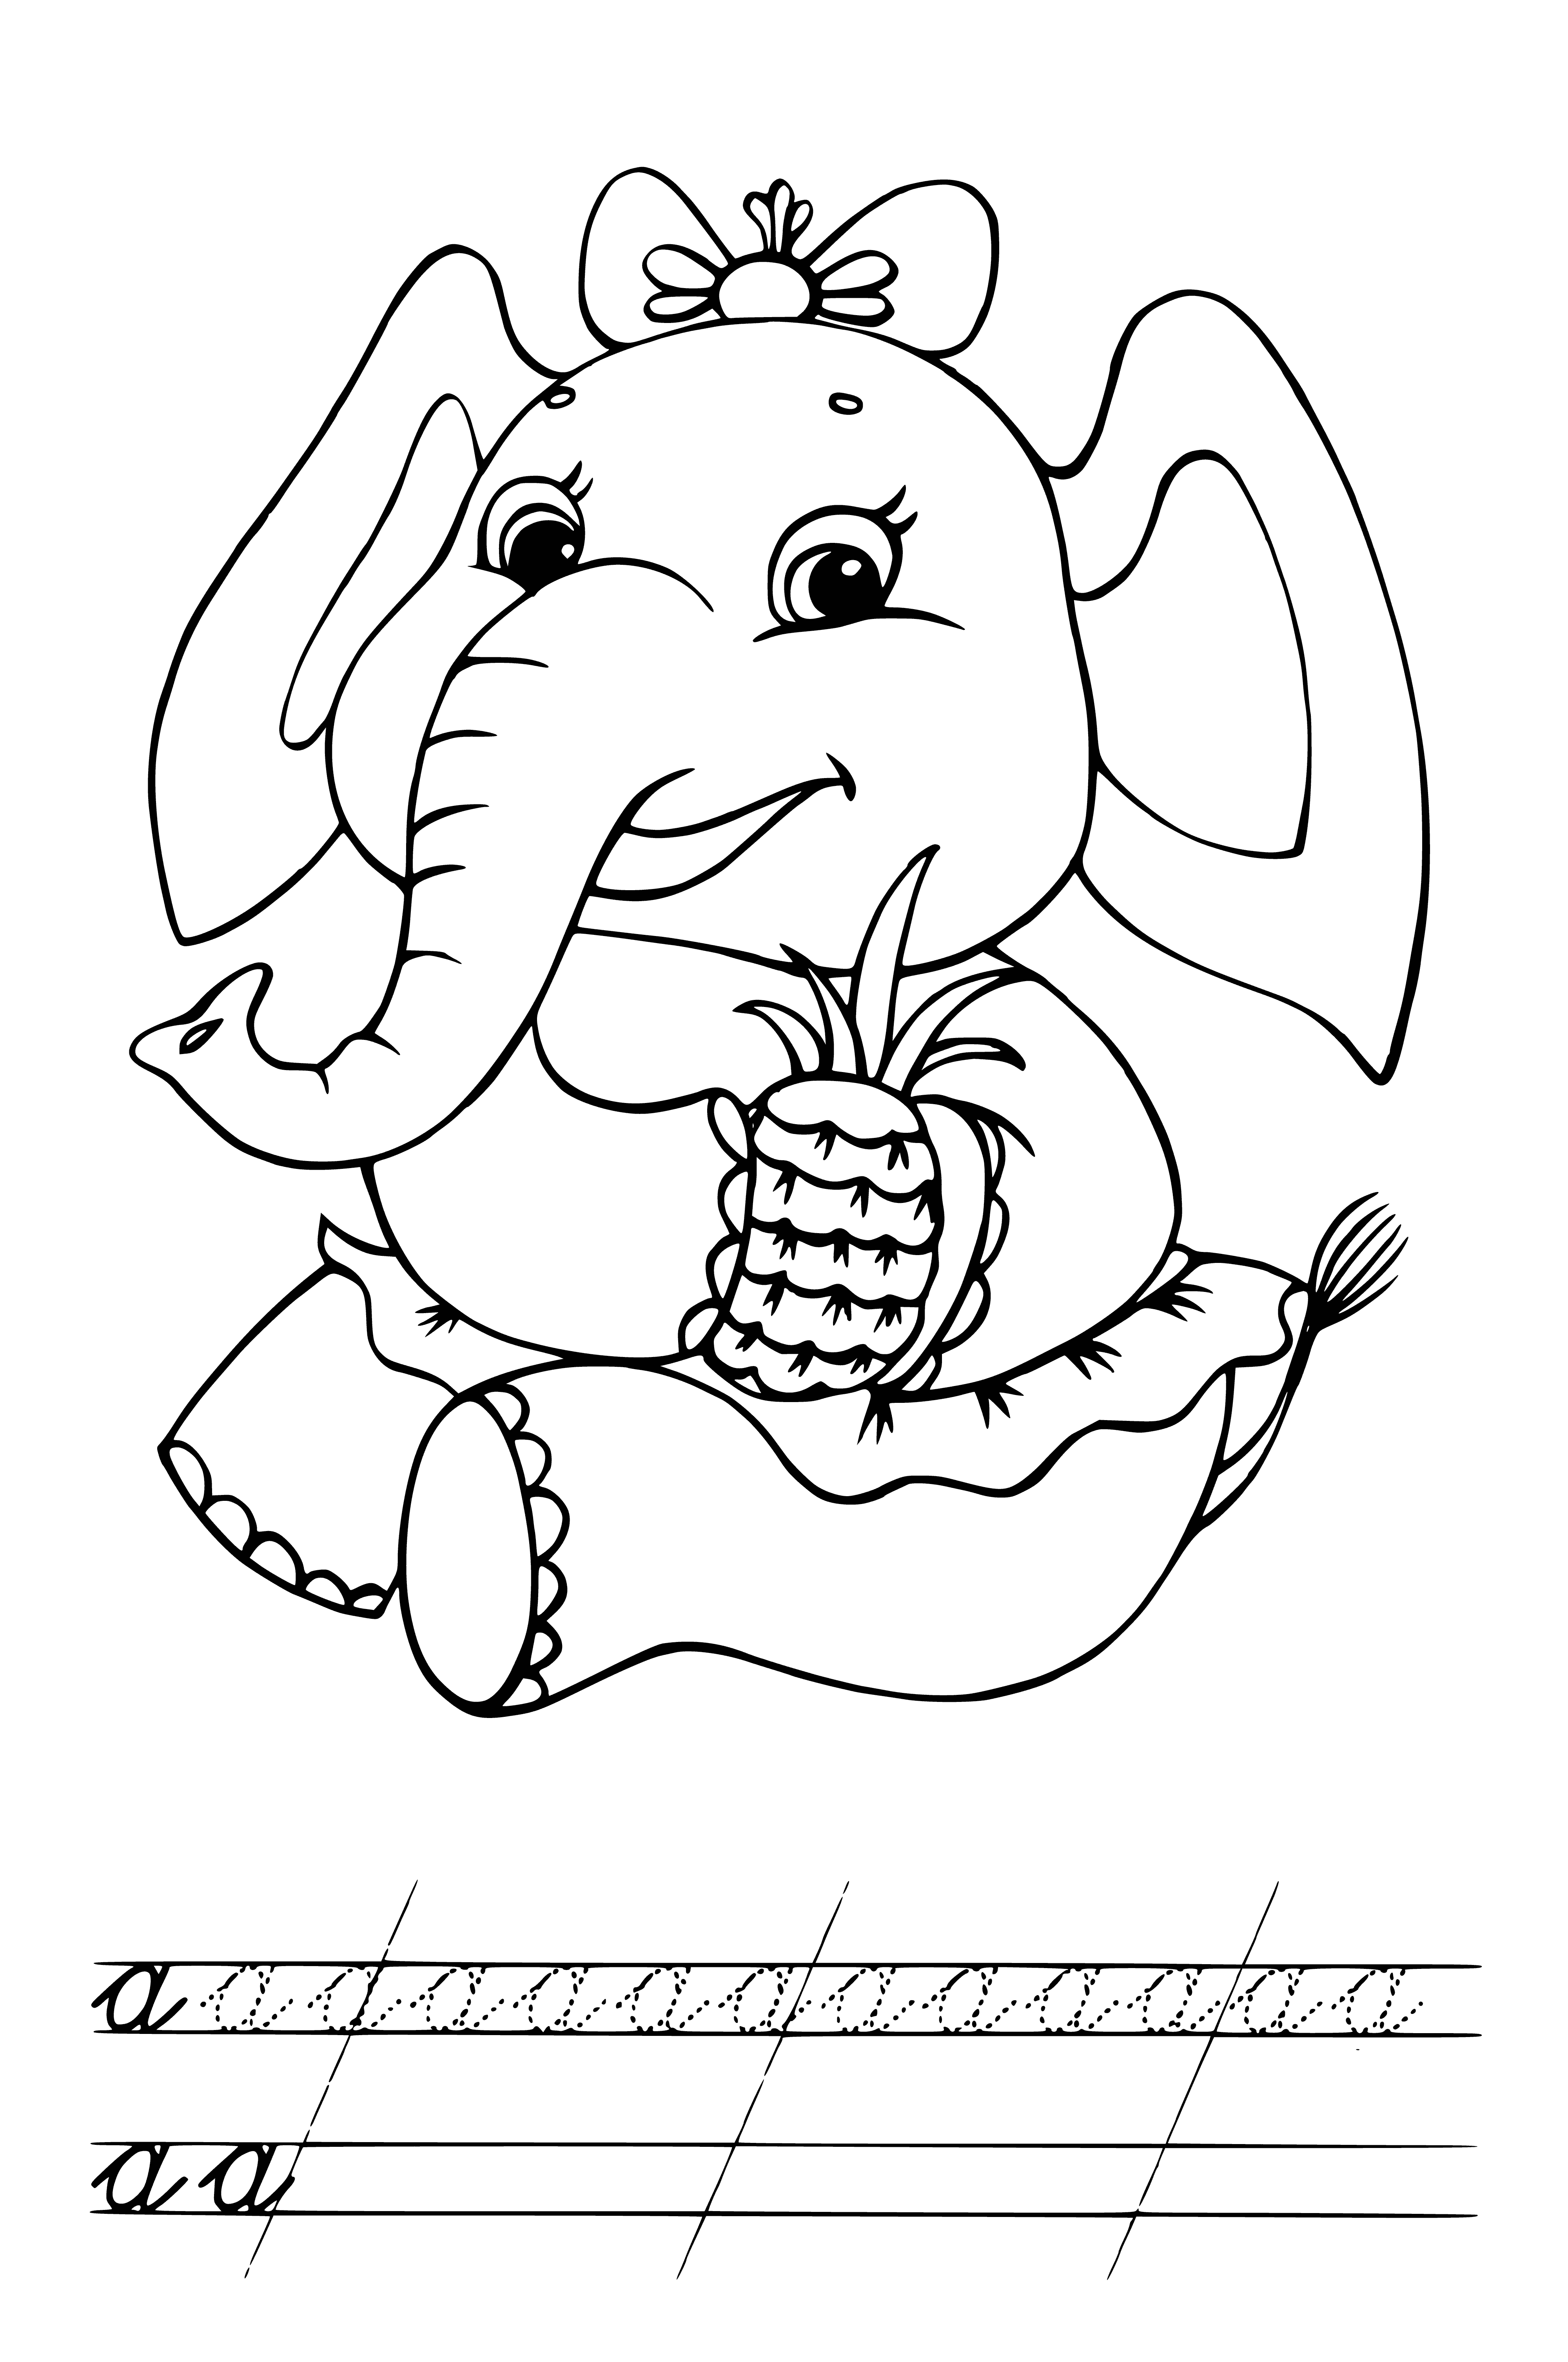 Baby elephant coloring page